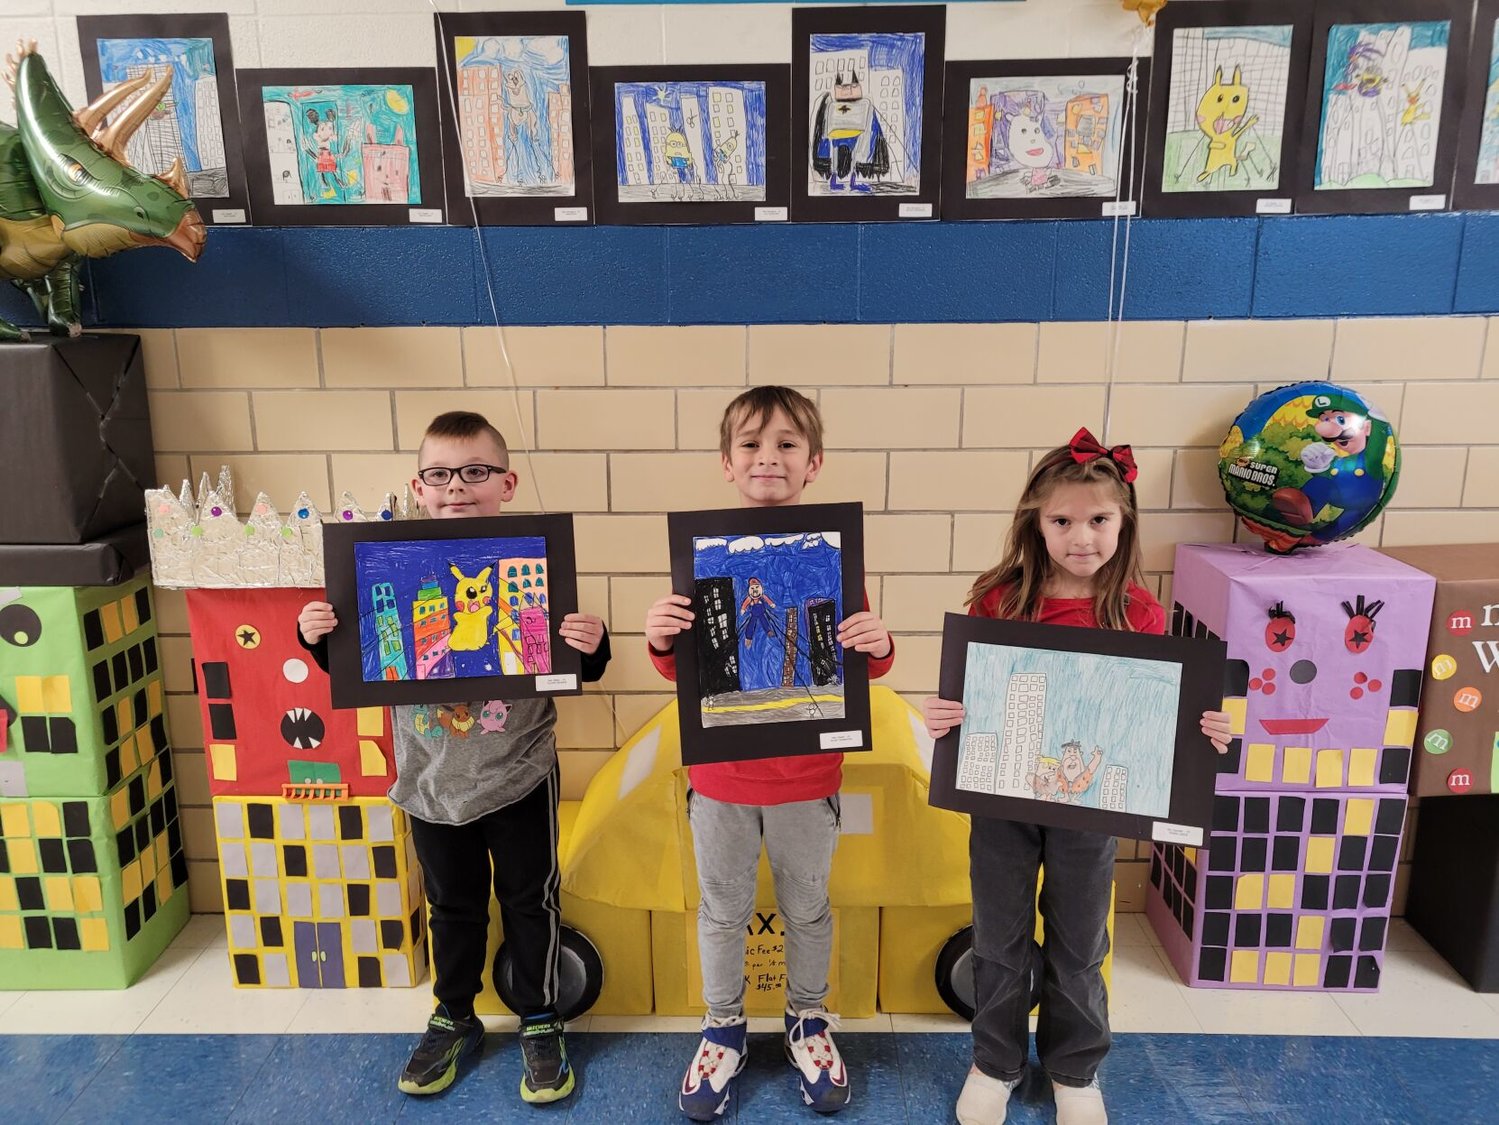 These first grades are just some of the many wonderful artists that contributed their floats to make Hubble's 2nd Annual Macy Thanksgiving parade a hit!


Mail Photos by John "J.T." Jones.